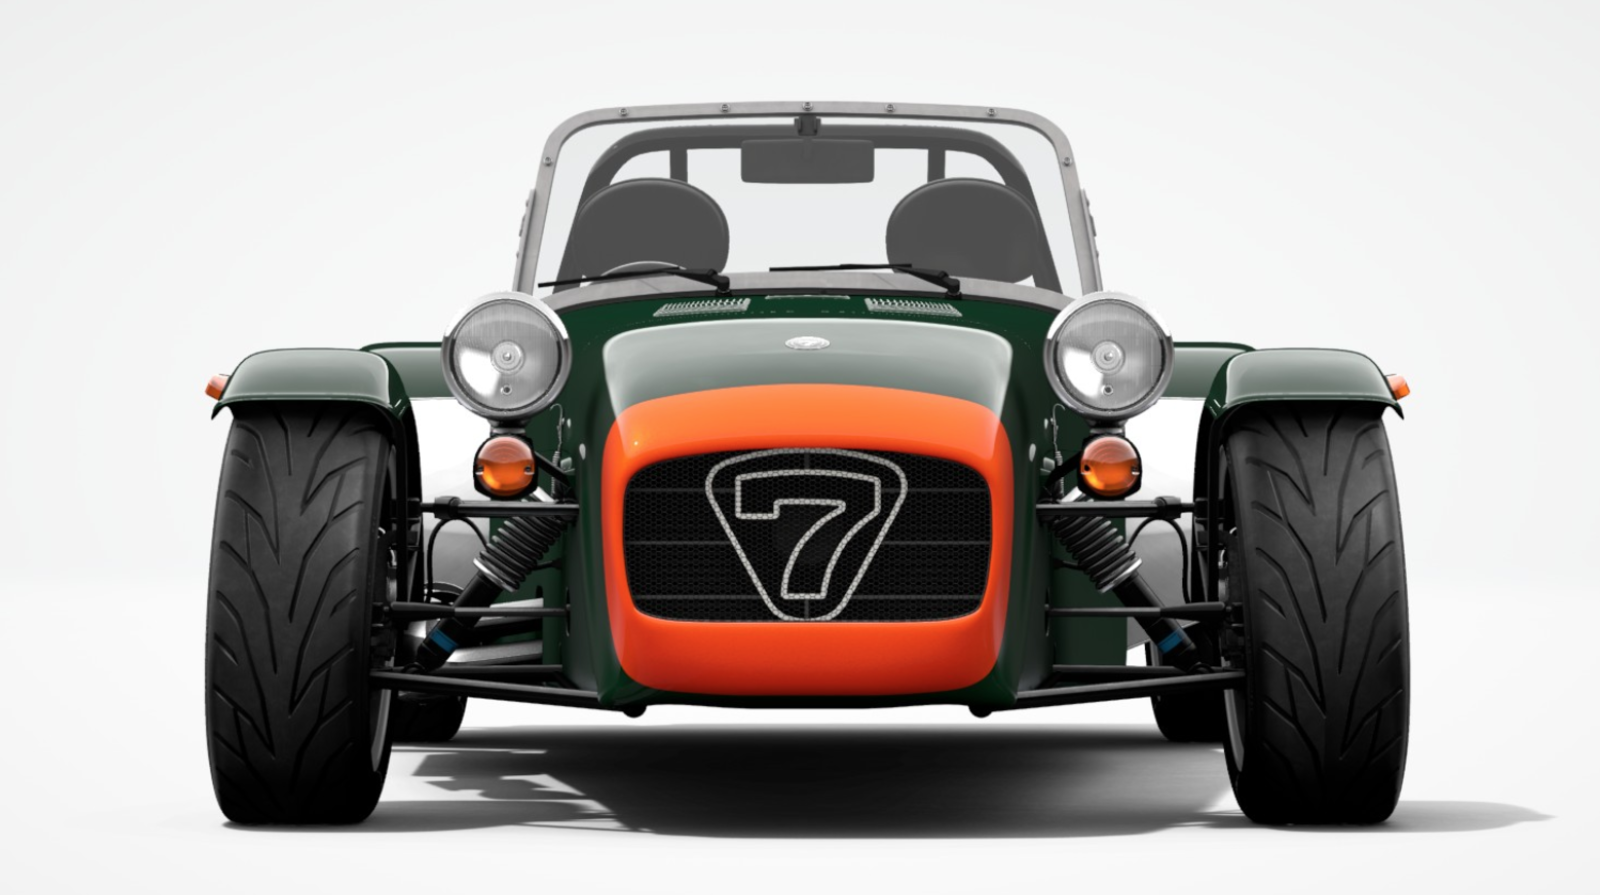 Illustration for article titled Caterhams got a configurator now